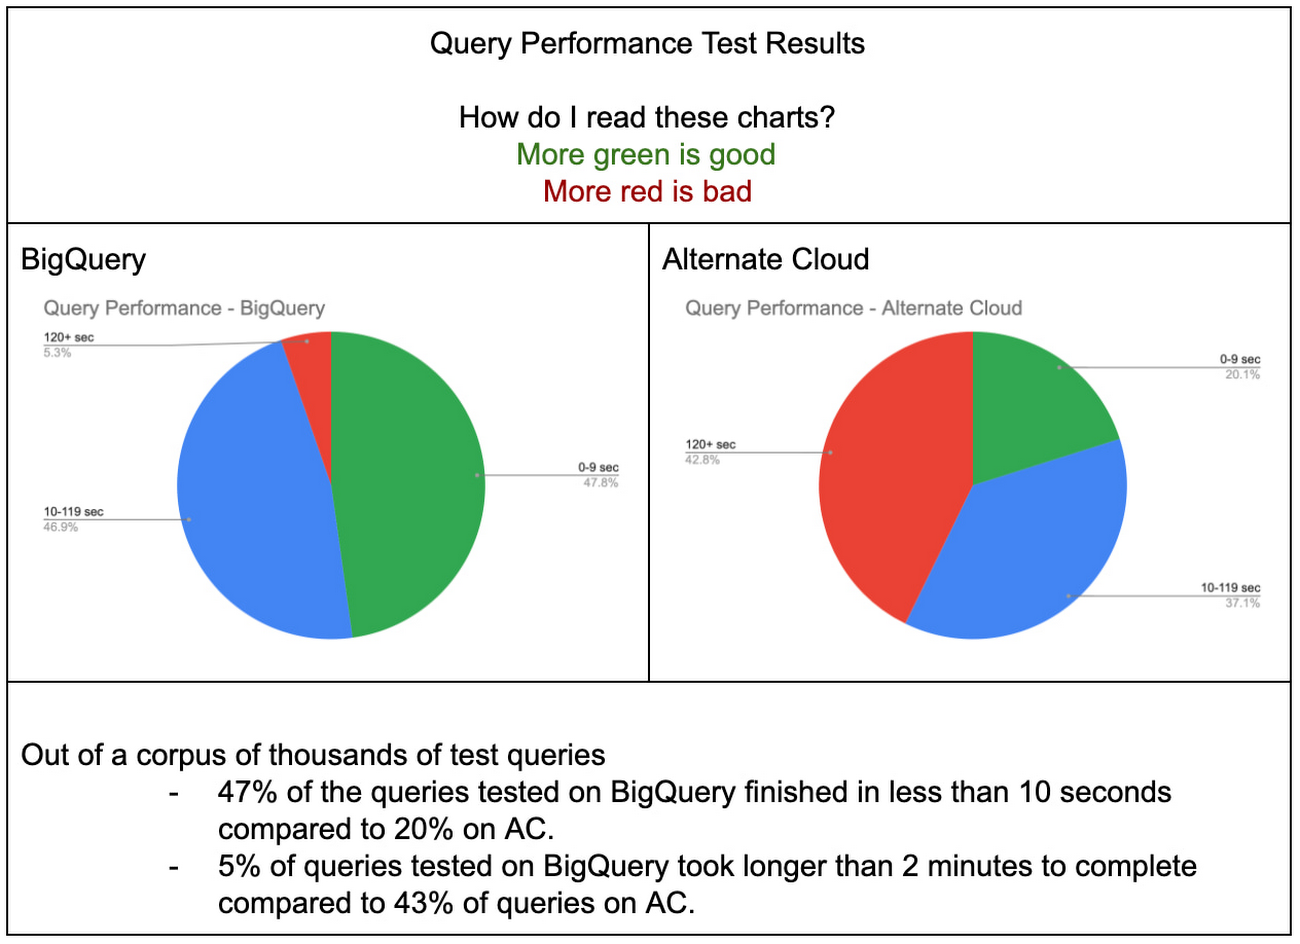 Query Performance Test Results.jpg